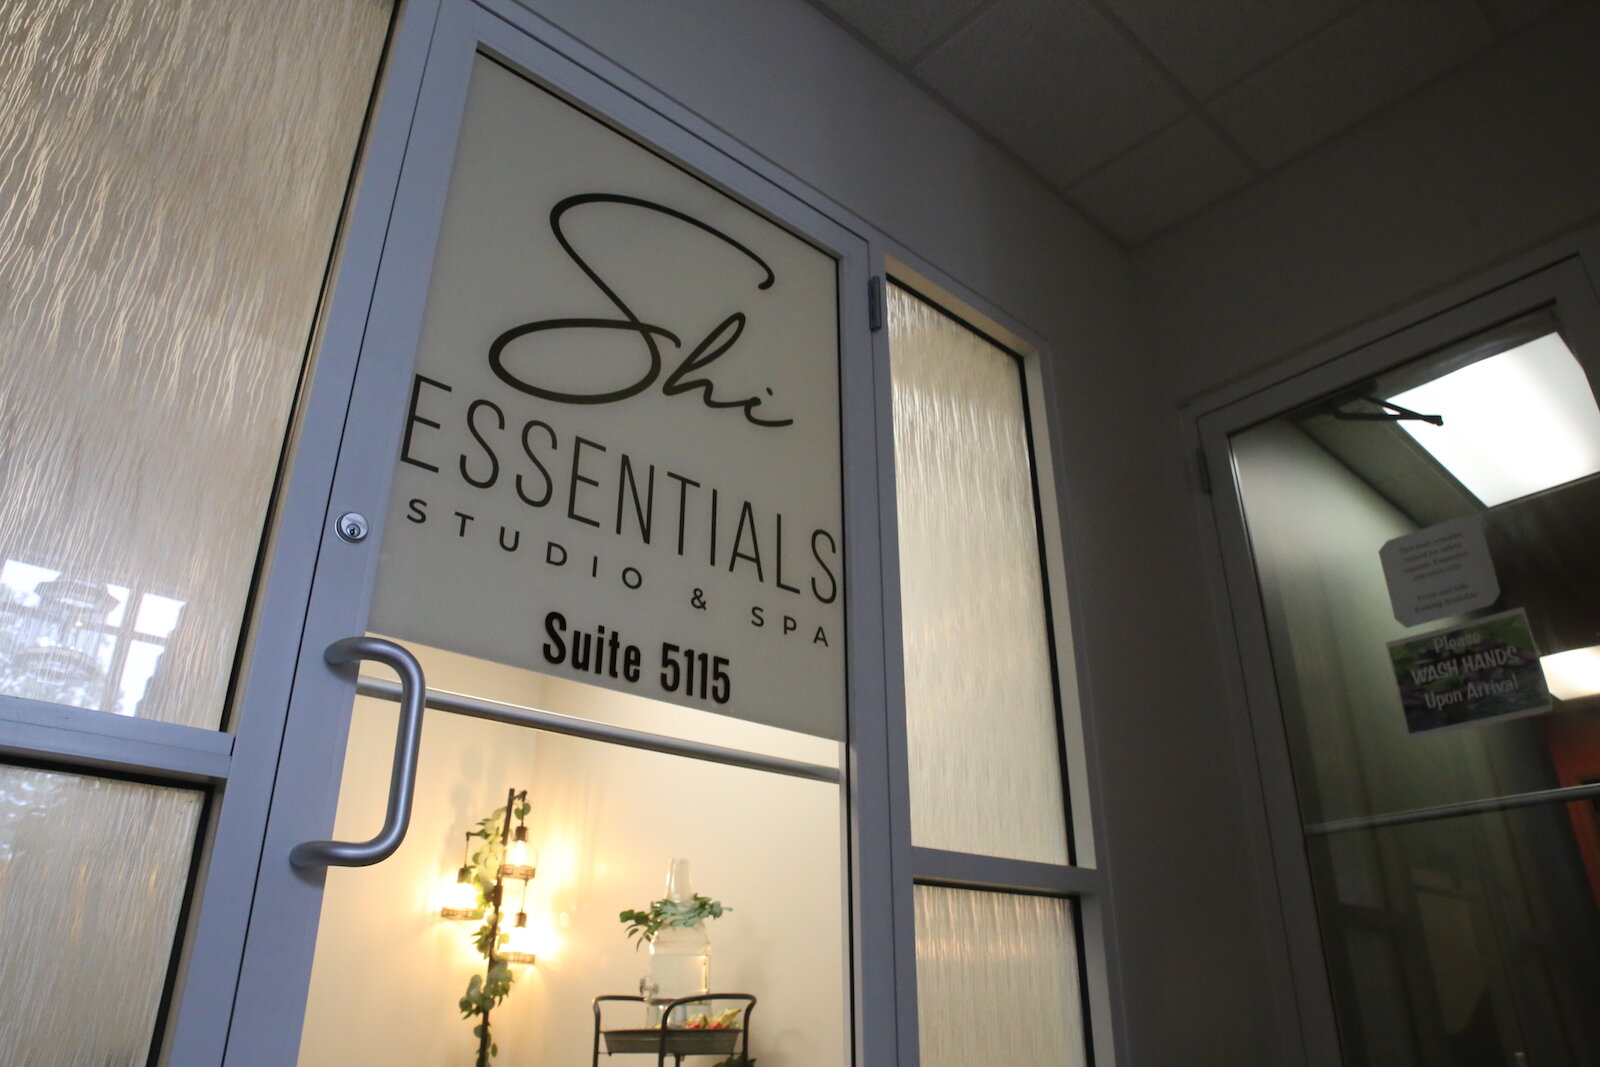 in June 2021, Shi'Dasha “Shi” James opened her first location for Shi Essentials Studio and Spa at 5115 North Bend Dr. in Fort Wayne.